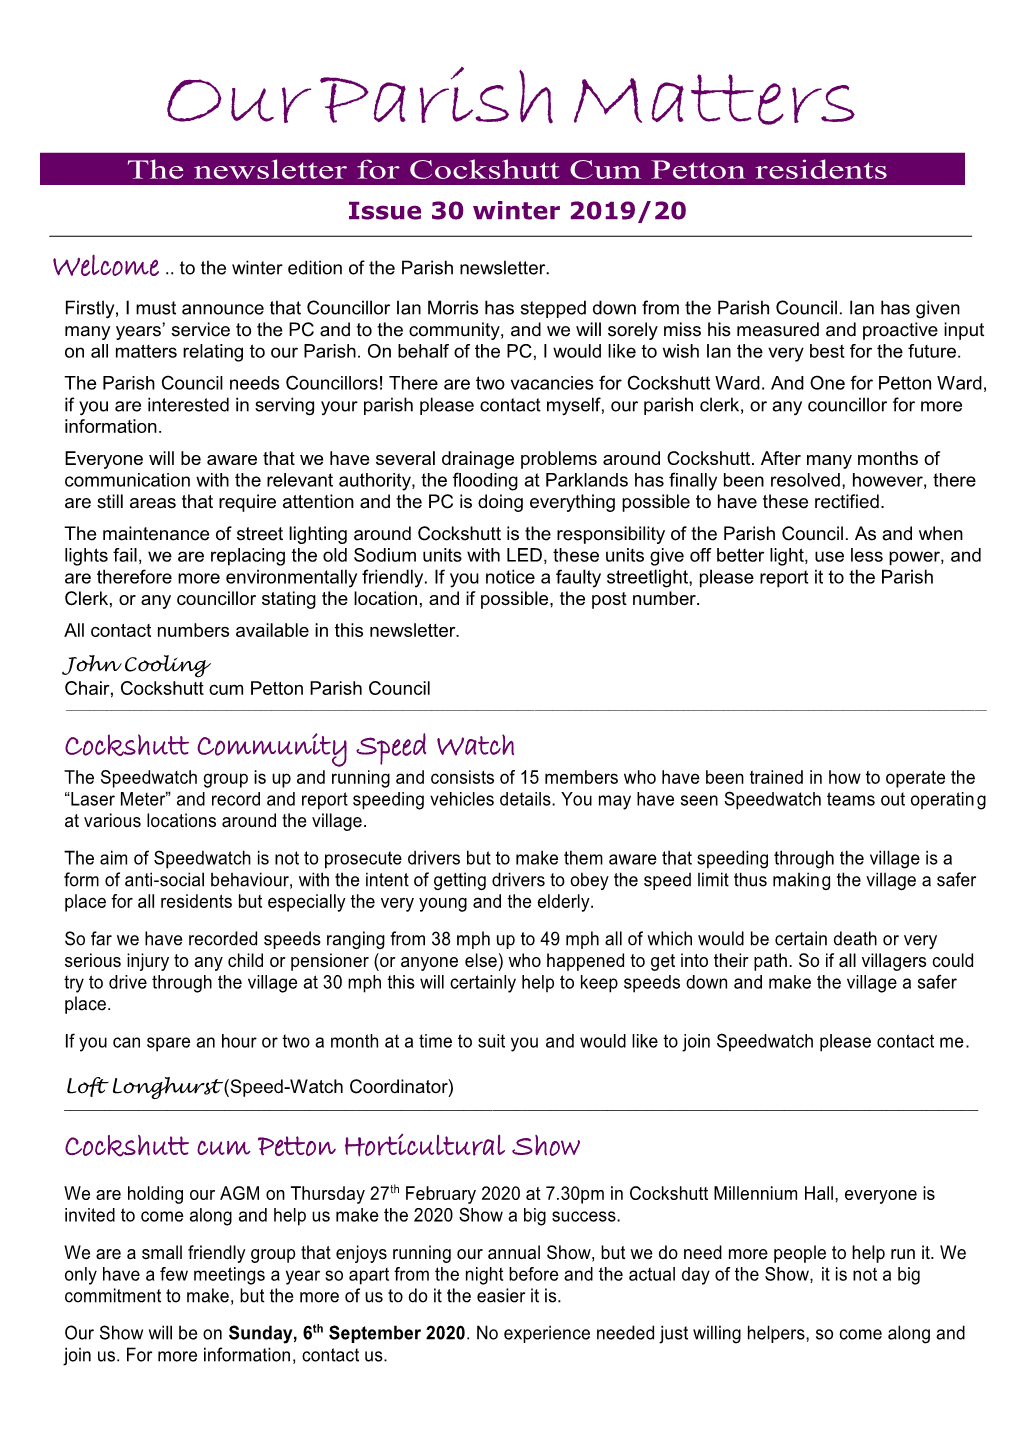 Our Parish Matters the Newsletter for Cockshutt Cum Petton Residents Issue 30 Winter 2019/20